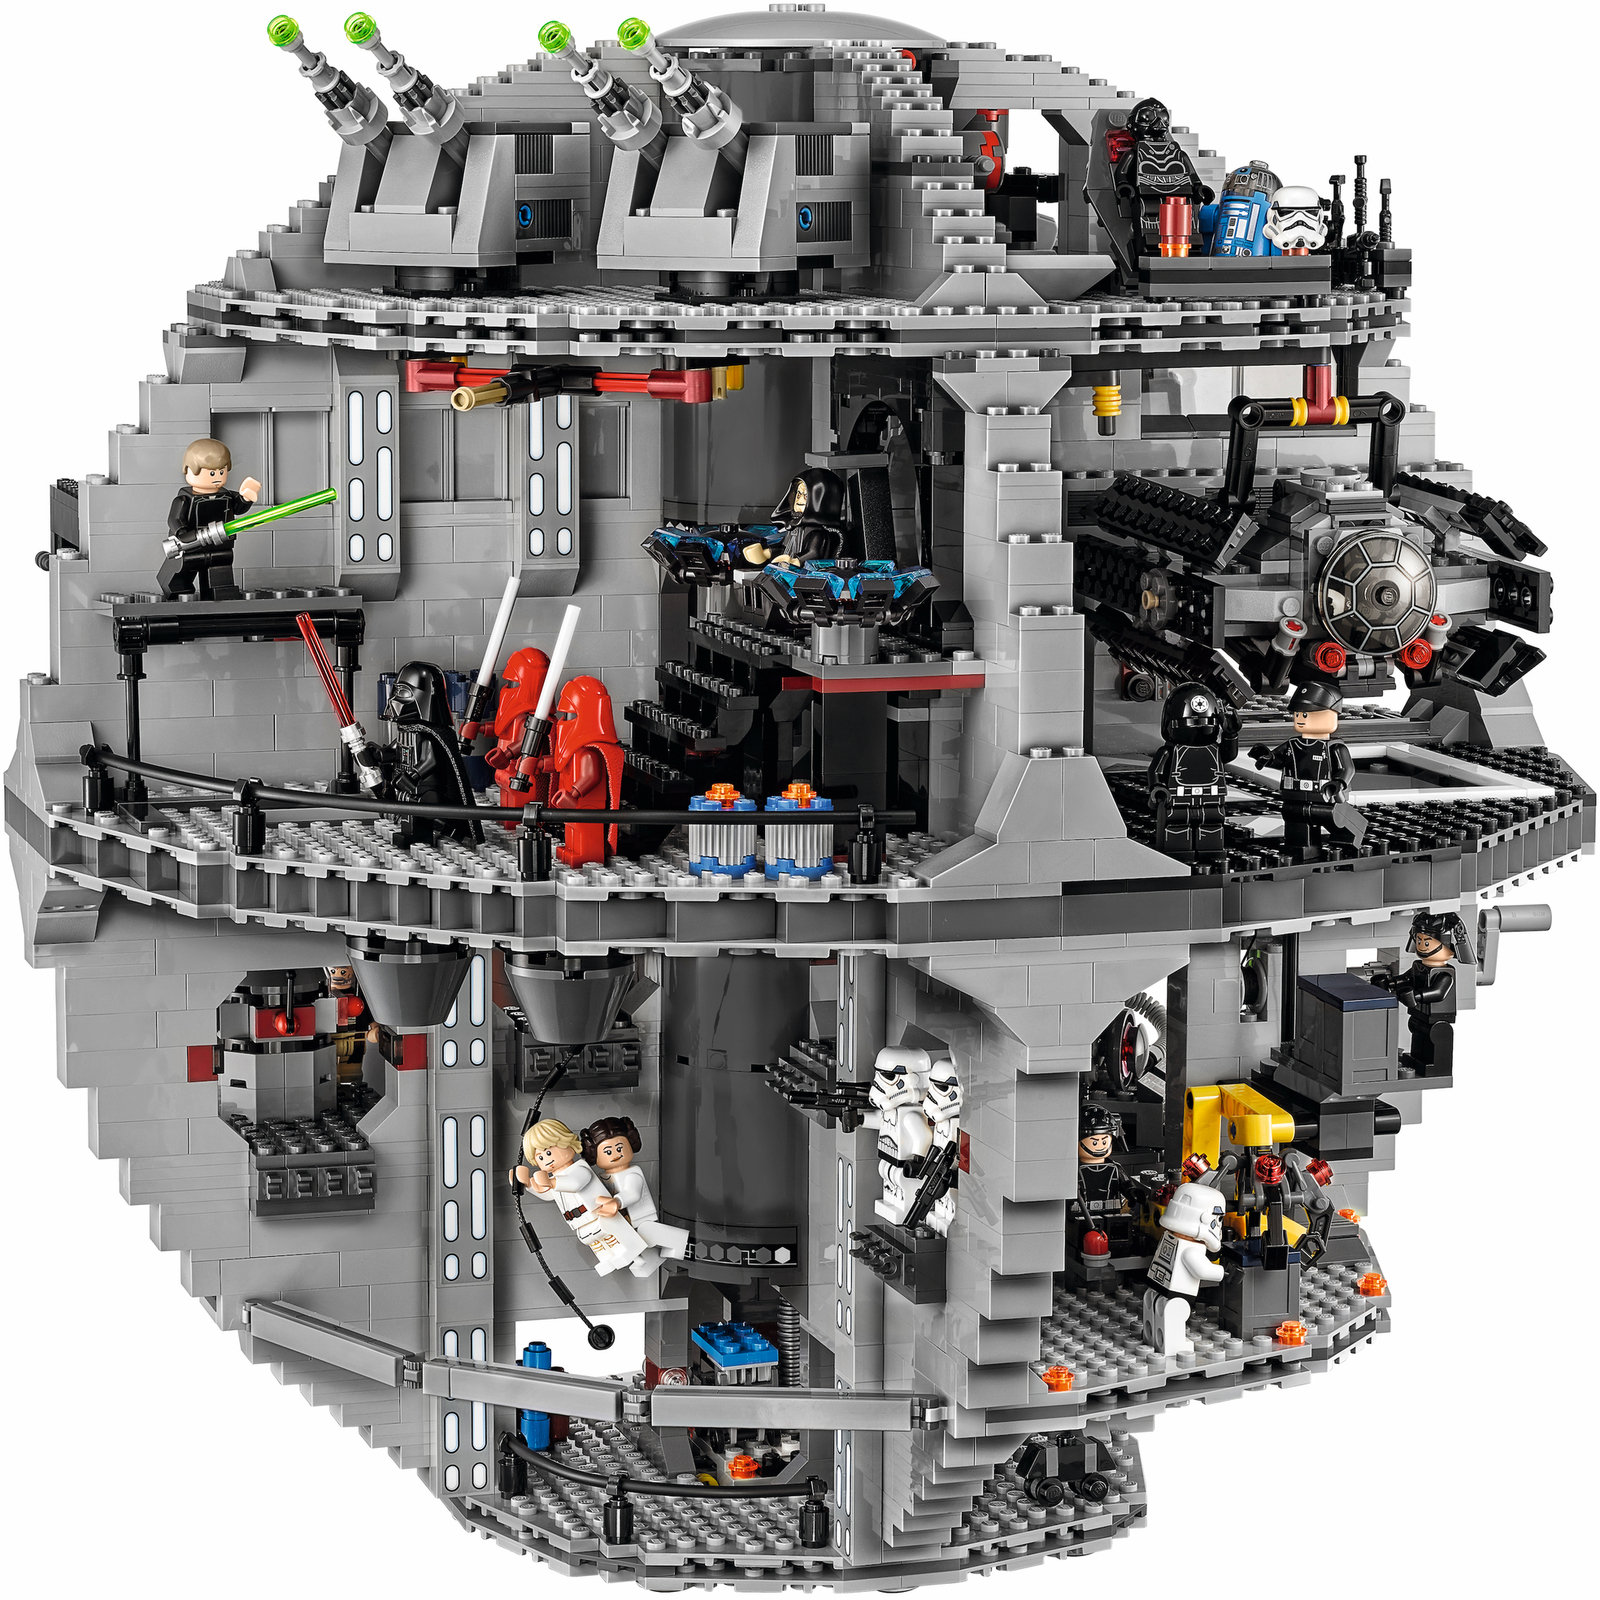 LEGO Death Star 75159 - Super Smooth stop motion build